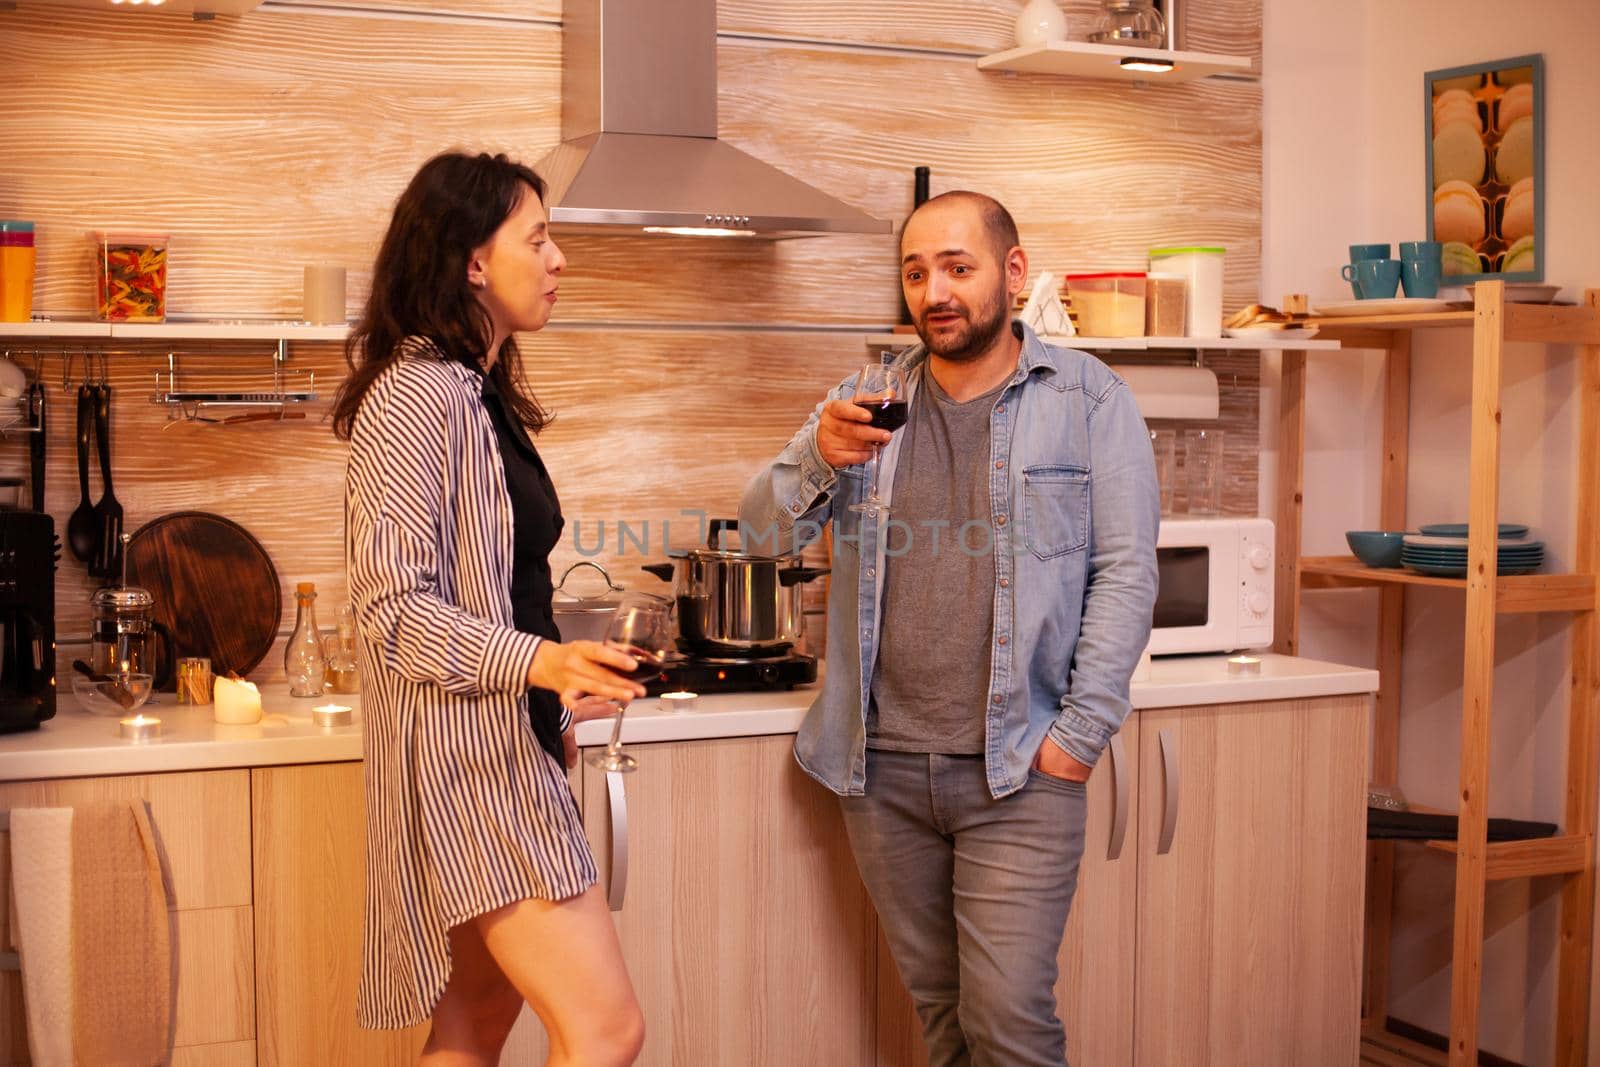 Lovers drinking wine and talking in kitchen during the evening. Adult couple at home, having a conversation, smiling, enjoying the meal in dining room.